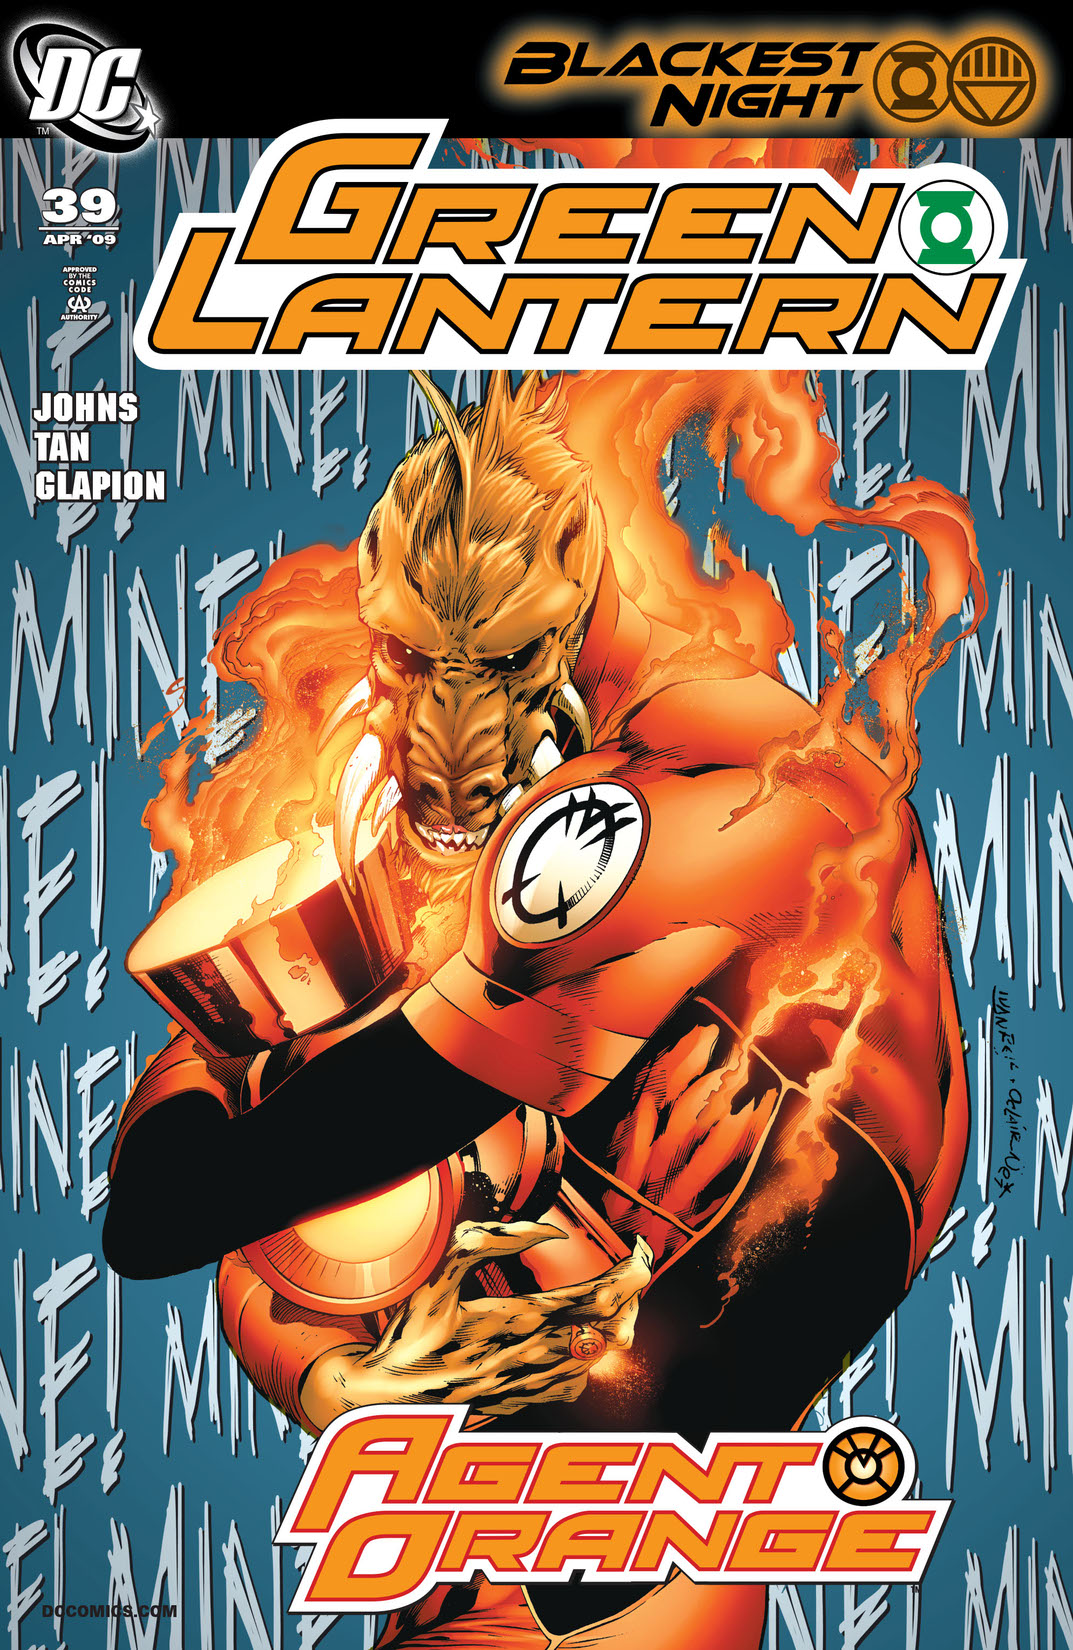 Green Lantern (2005-) #39 preview images